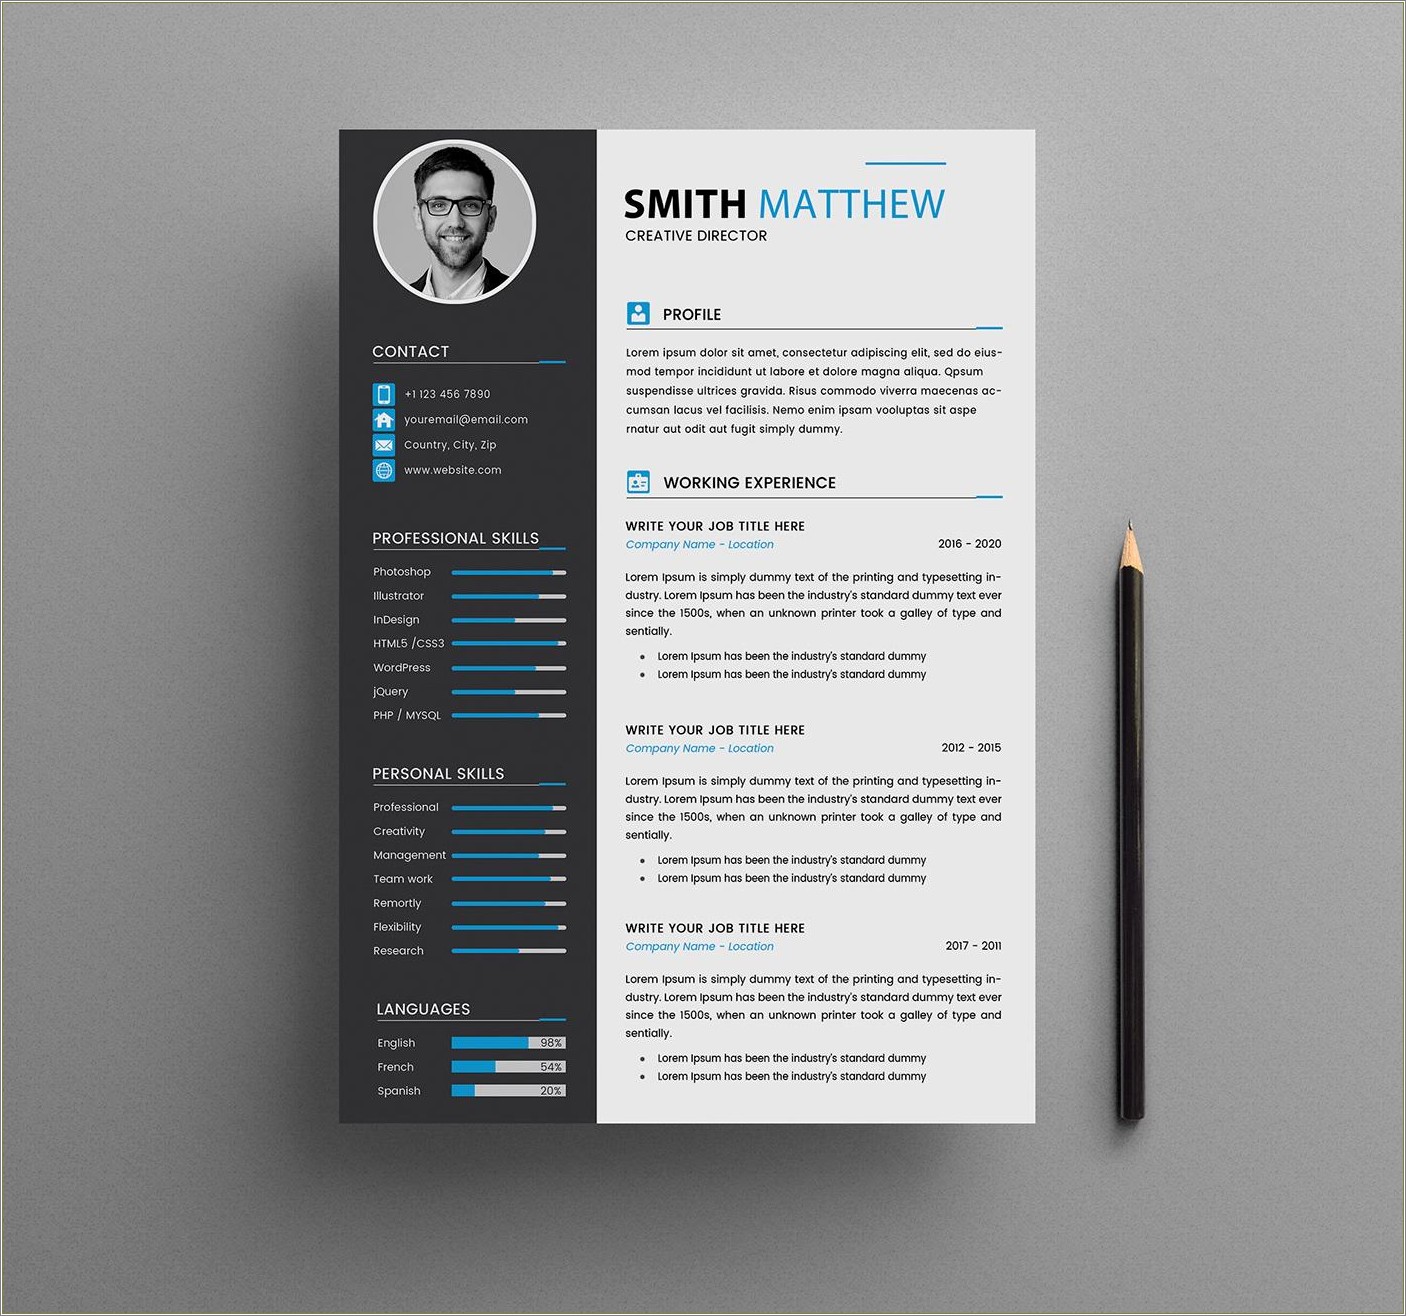 Free Resume Template Download For Freshers